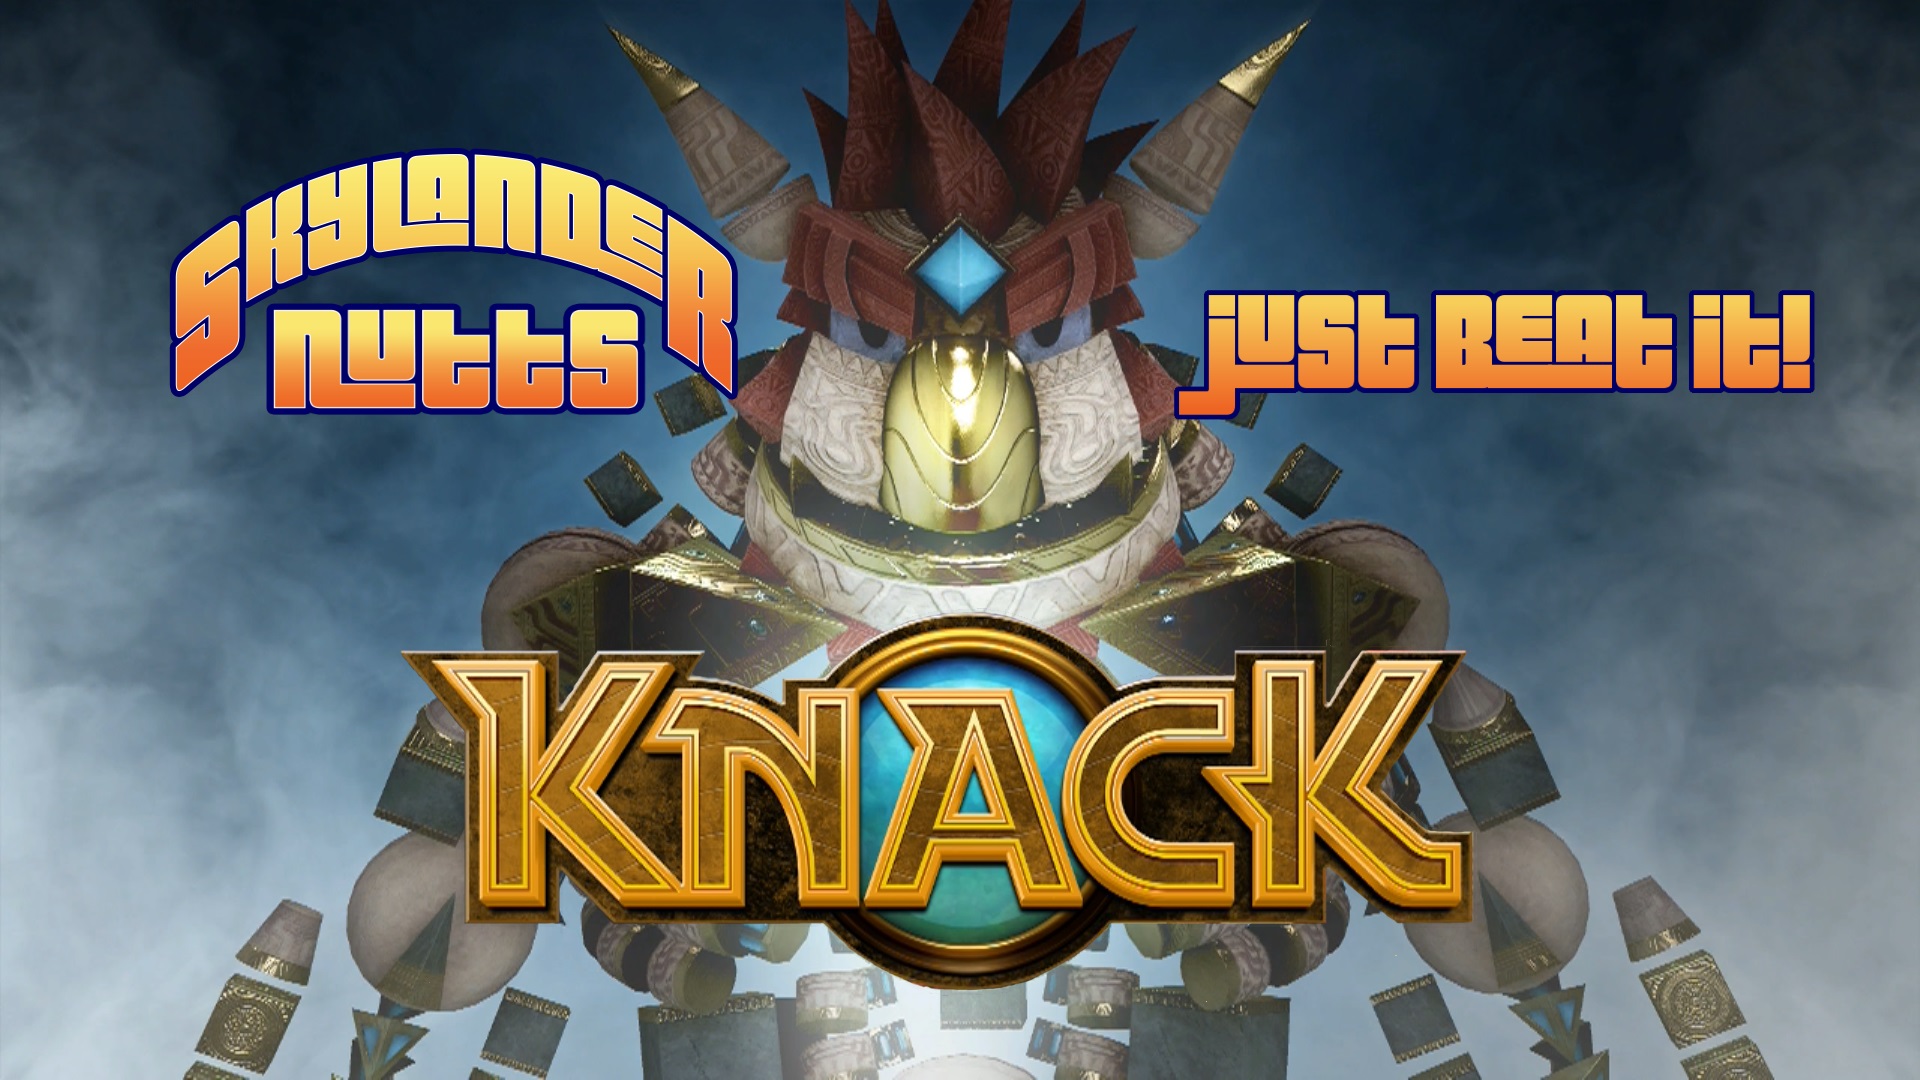 Just Beat It - Knack (From the Vault)